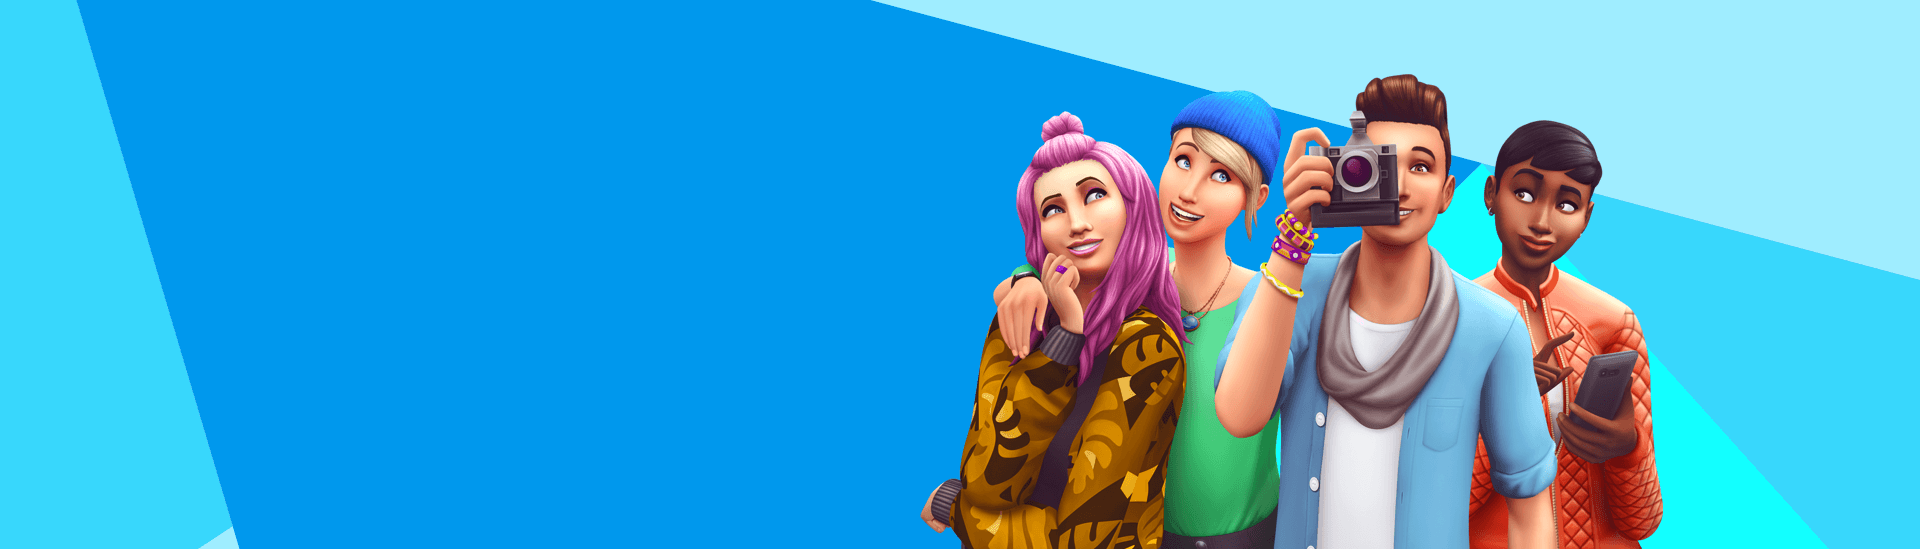 what can you do in the sims 4